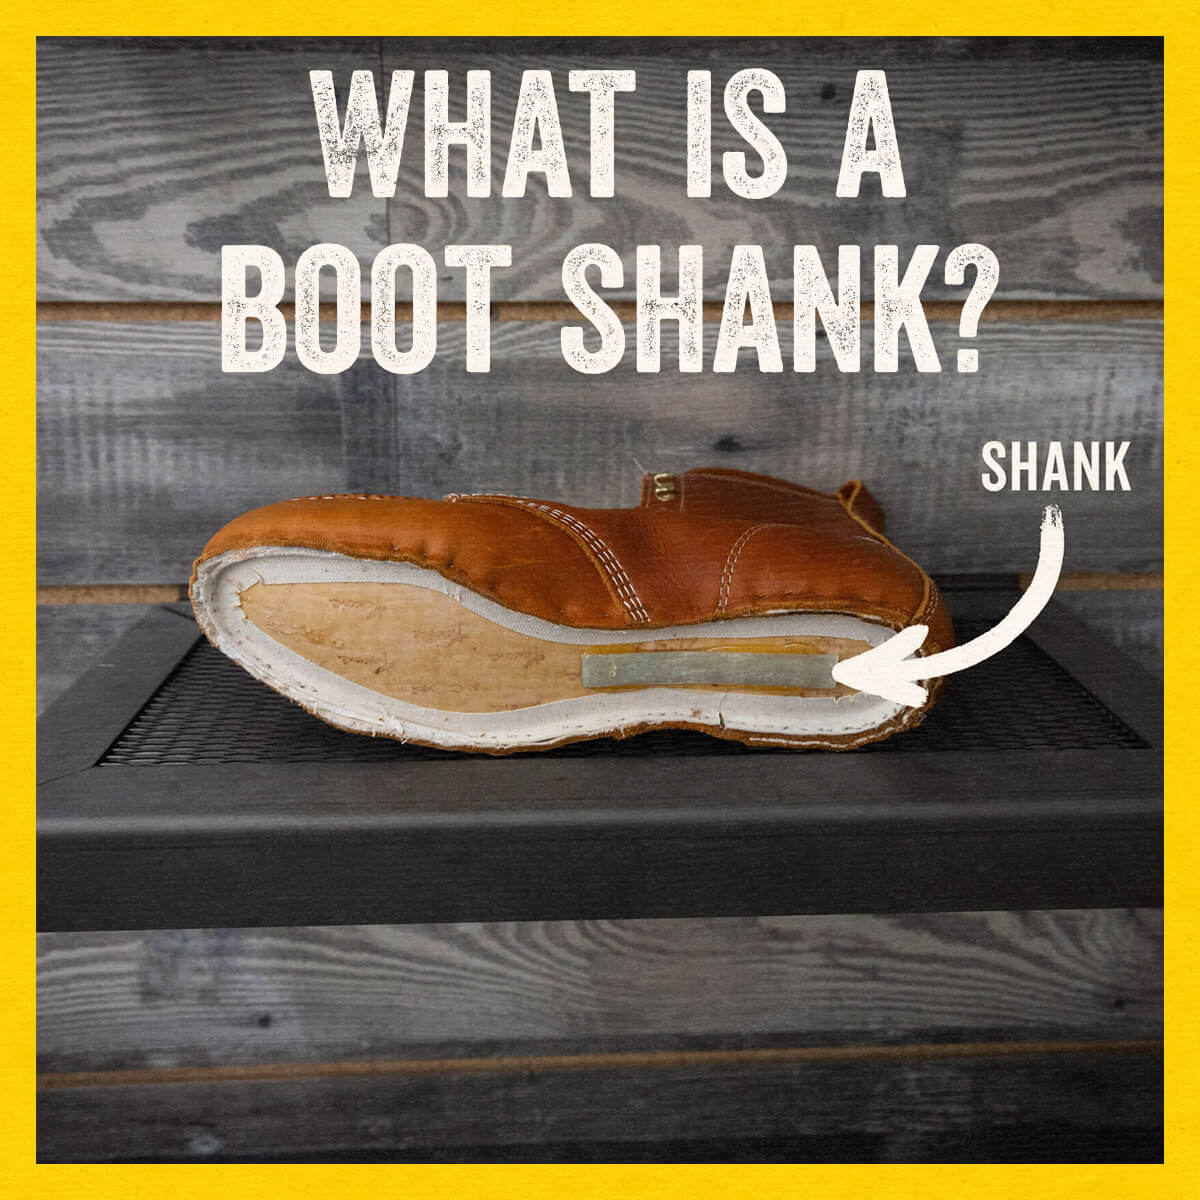 What is the shank of a boot?